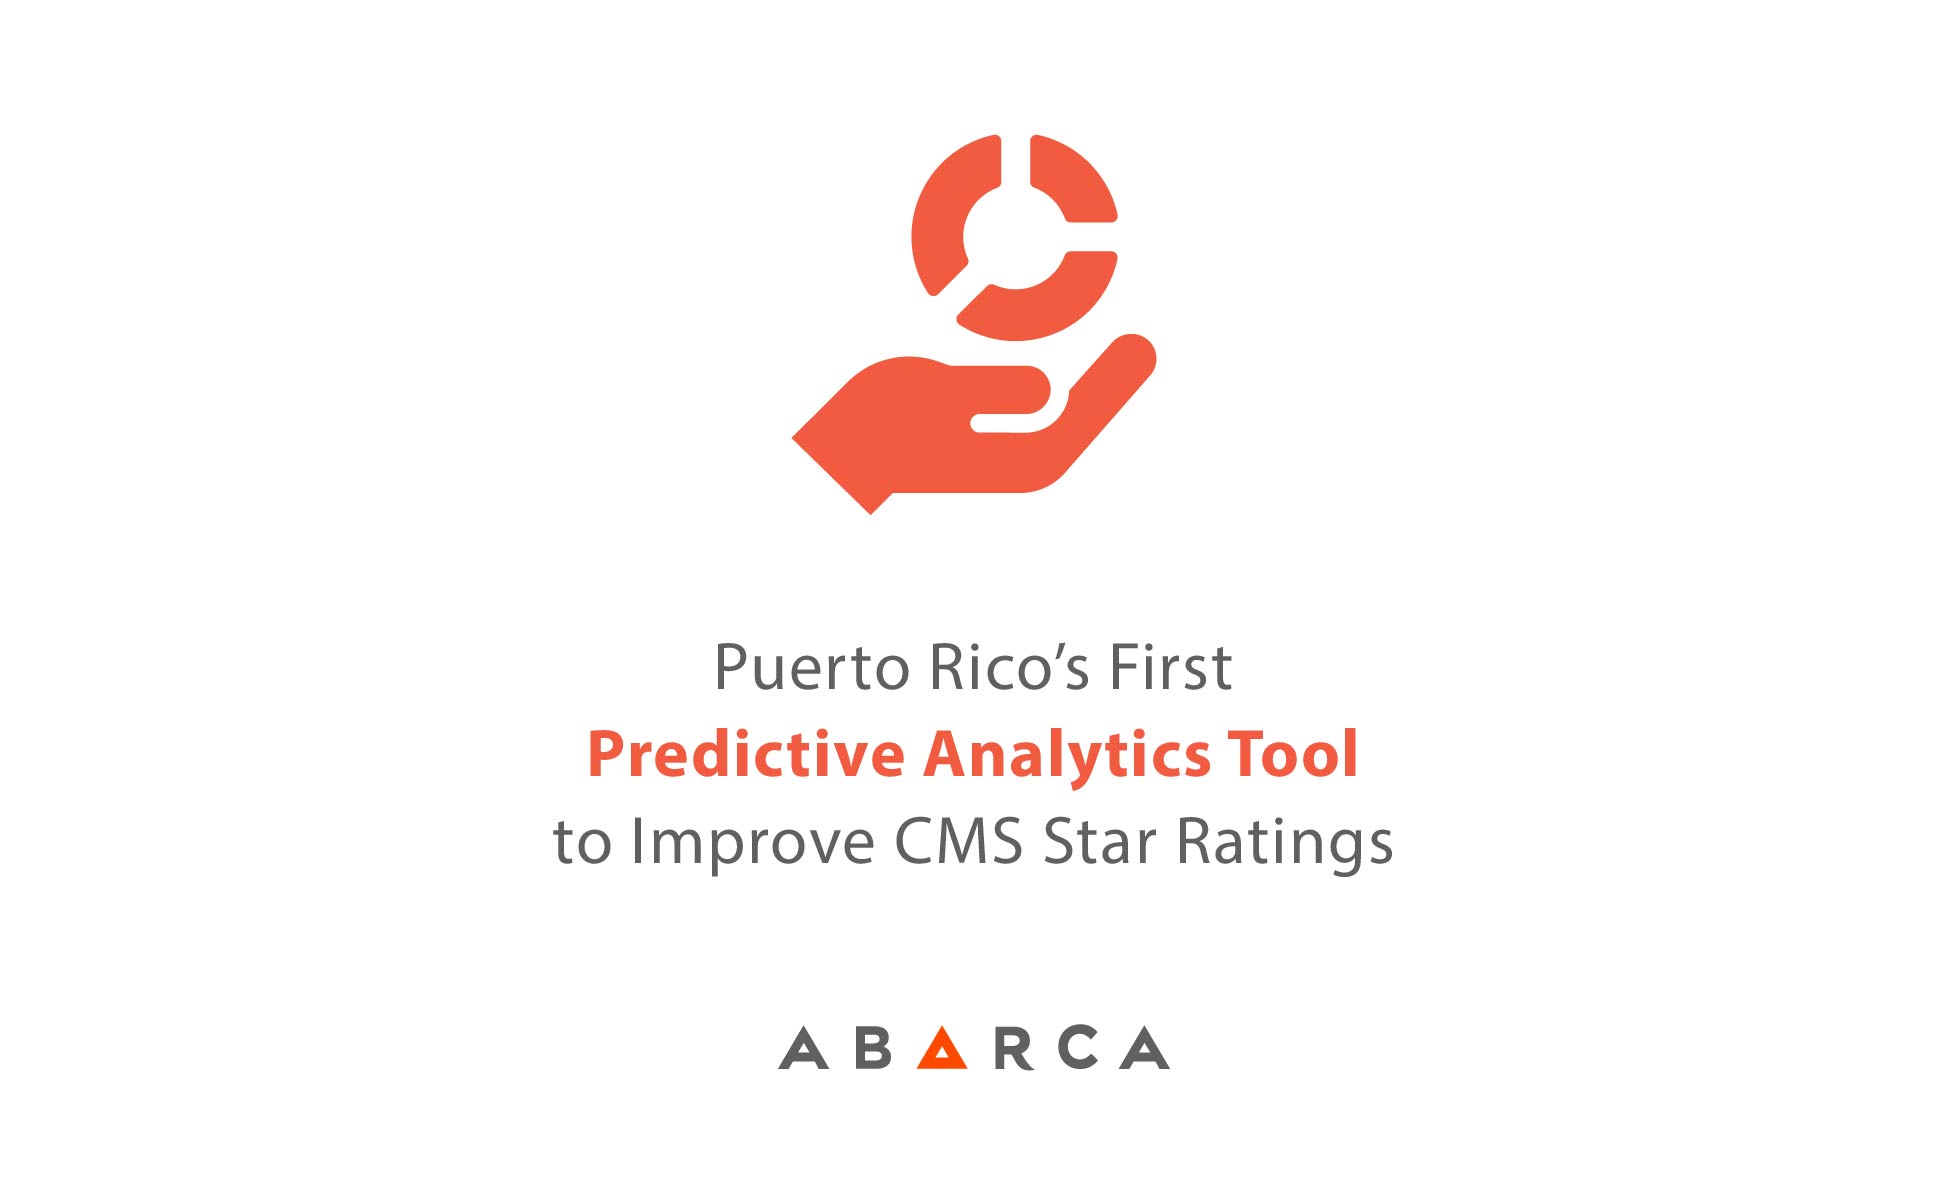 Abarca Health announces the release of RxTarget, Puerto Rico’s first predictive analytics tool to improve CMS Star Ratings for medication adherence & high-risk medications (HRM) announces the release of RxTarget, Puerto Rico’s first predictive analytics tool to improve CMS Star Ratings for medication adherence & high-risk medications (HRM)